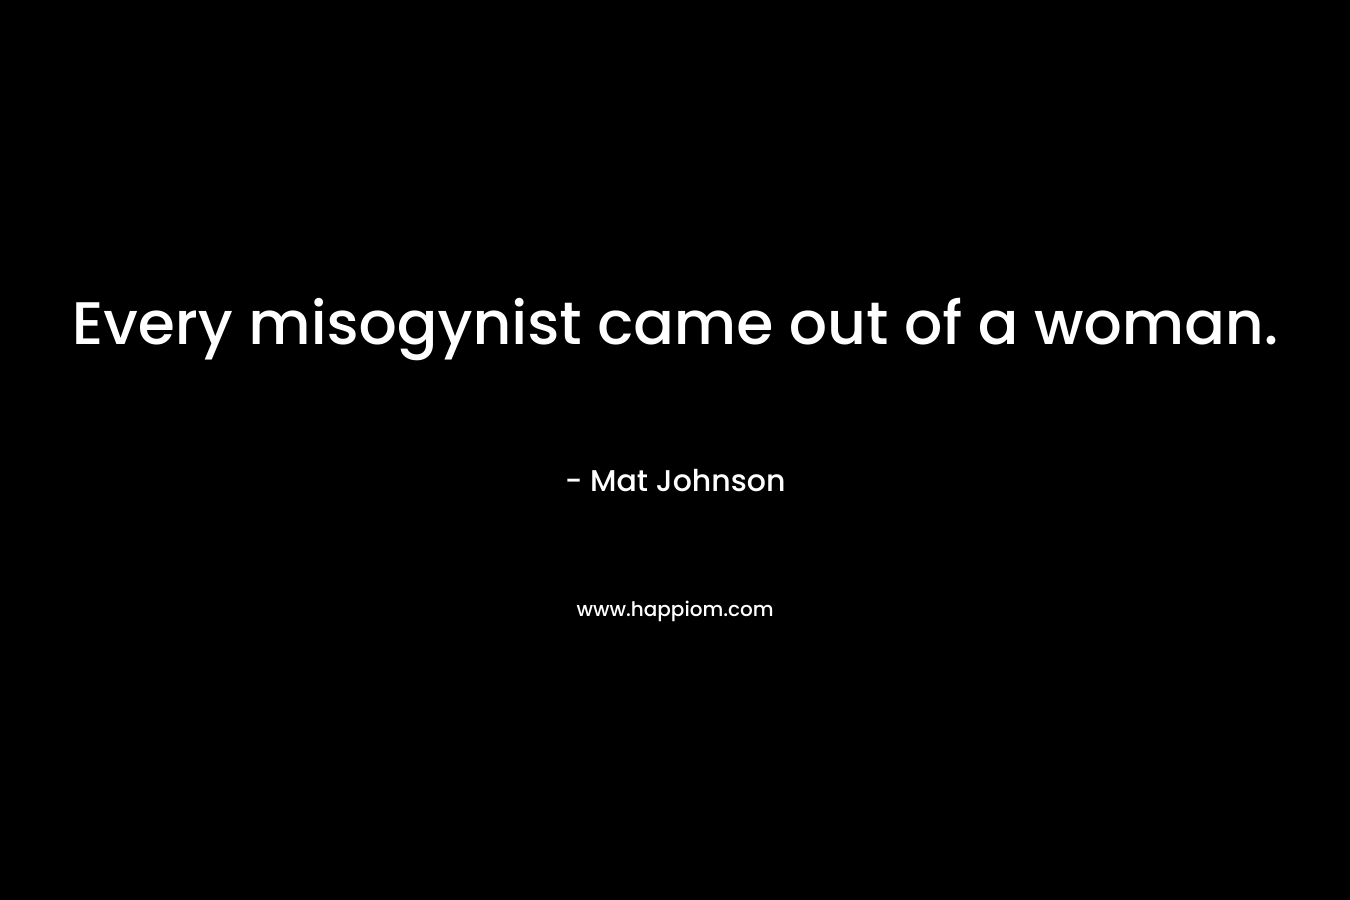 Every misogynist came out of a woman.